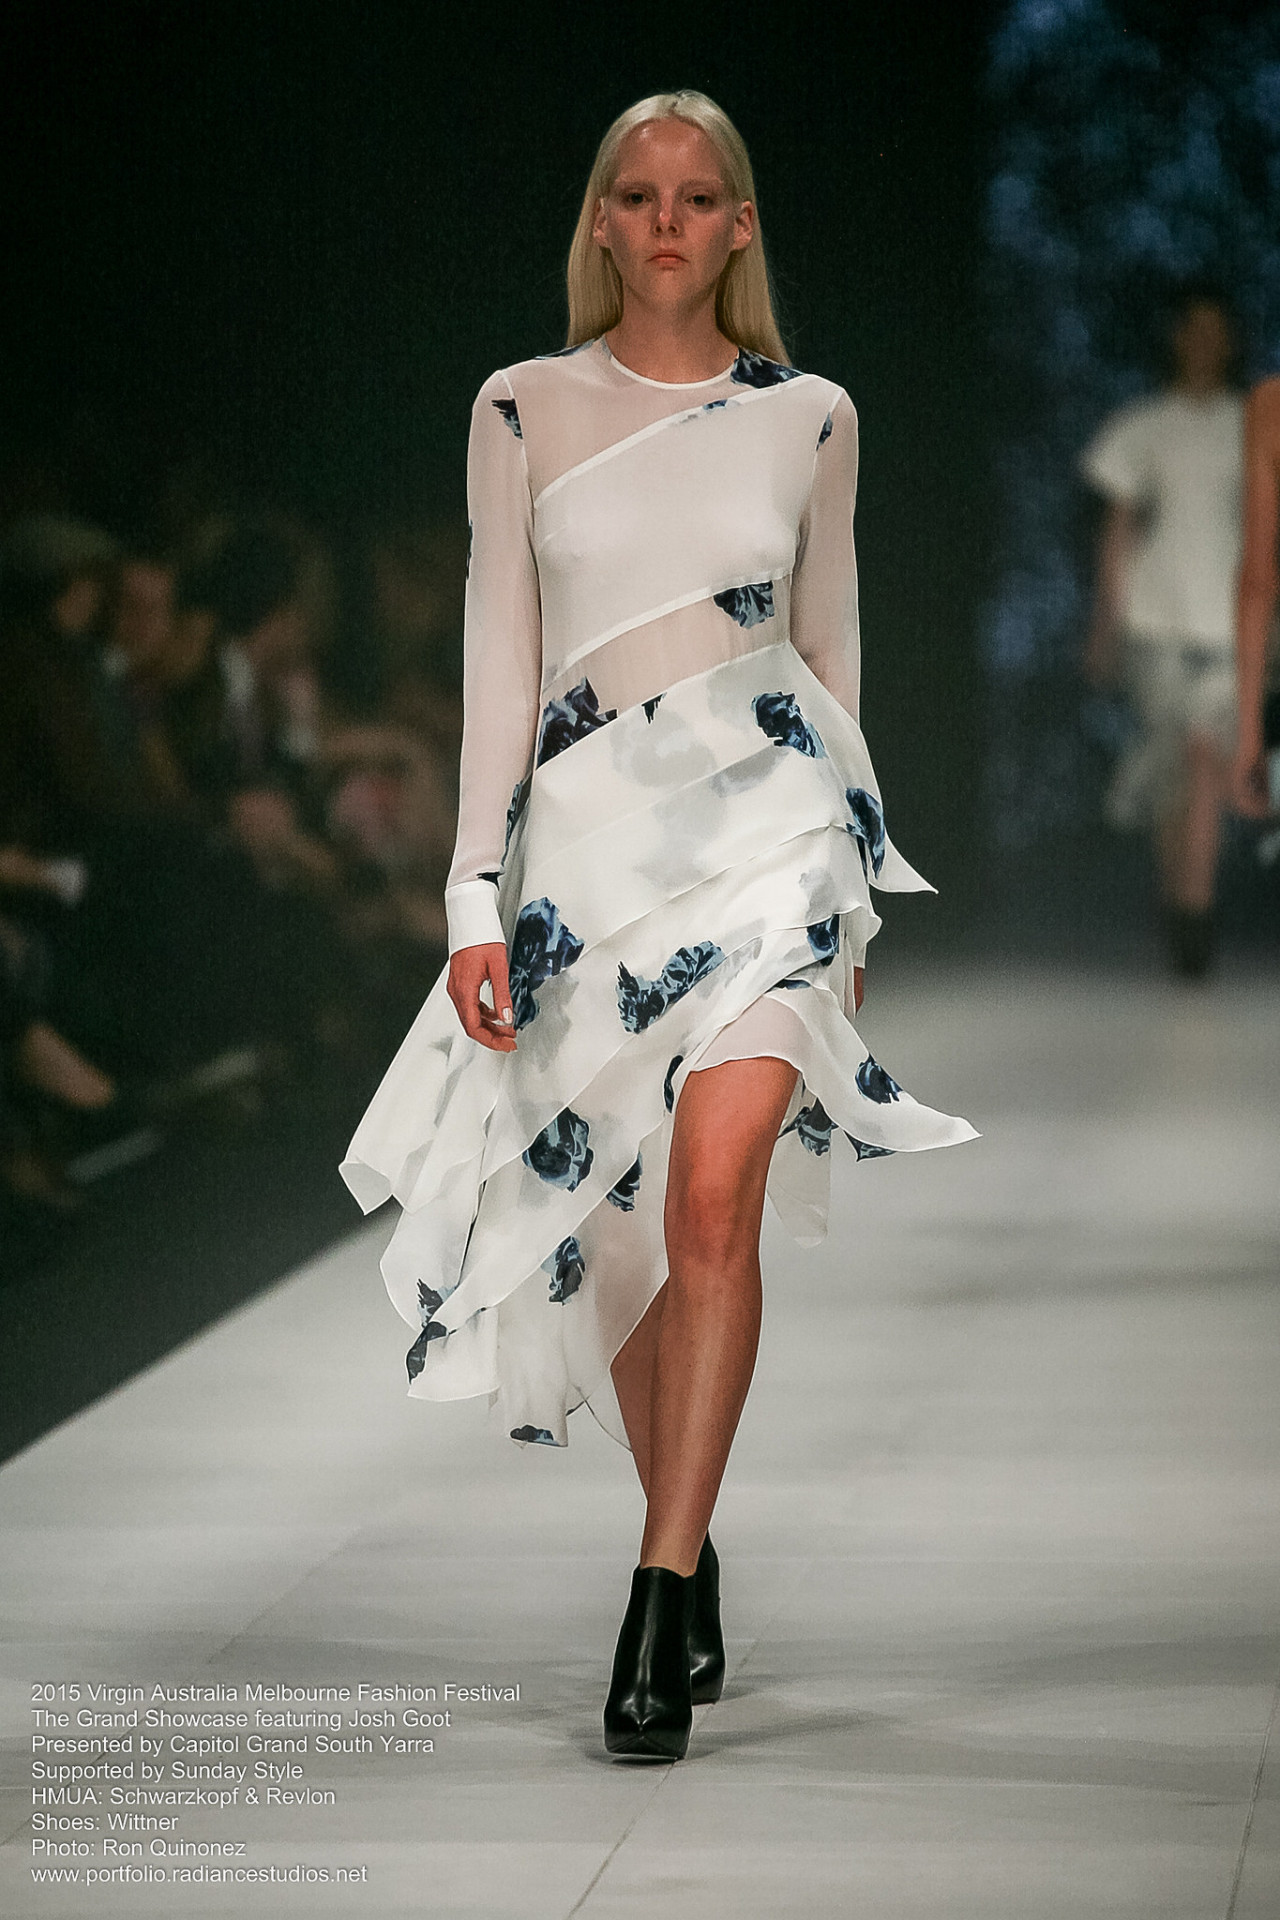 2015 Virgin Australia Melbourne Fashion Festival The Grand Showcase featuring Josh Goot Presented by Capitol Grand South Yarra Supported by Sunday Style HMUA: Schwarzkopf & Revlon Shoes: Wittner